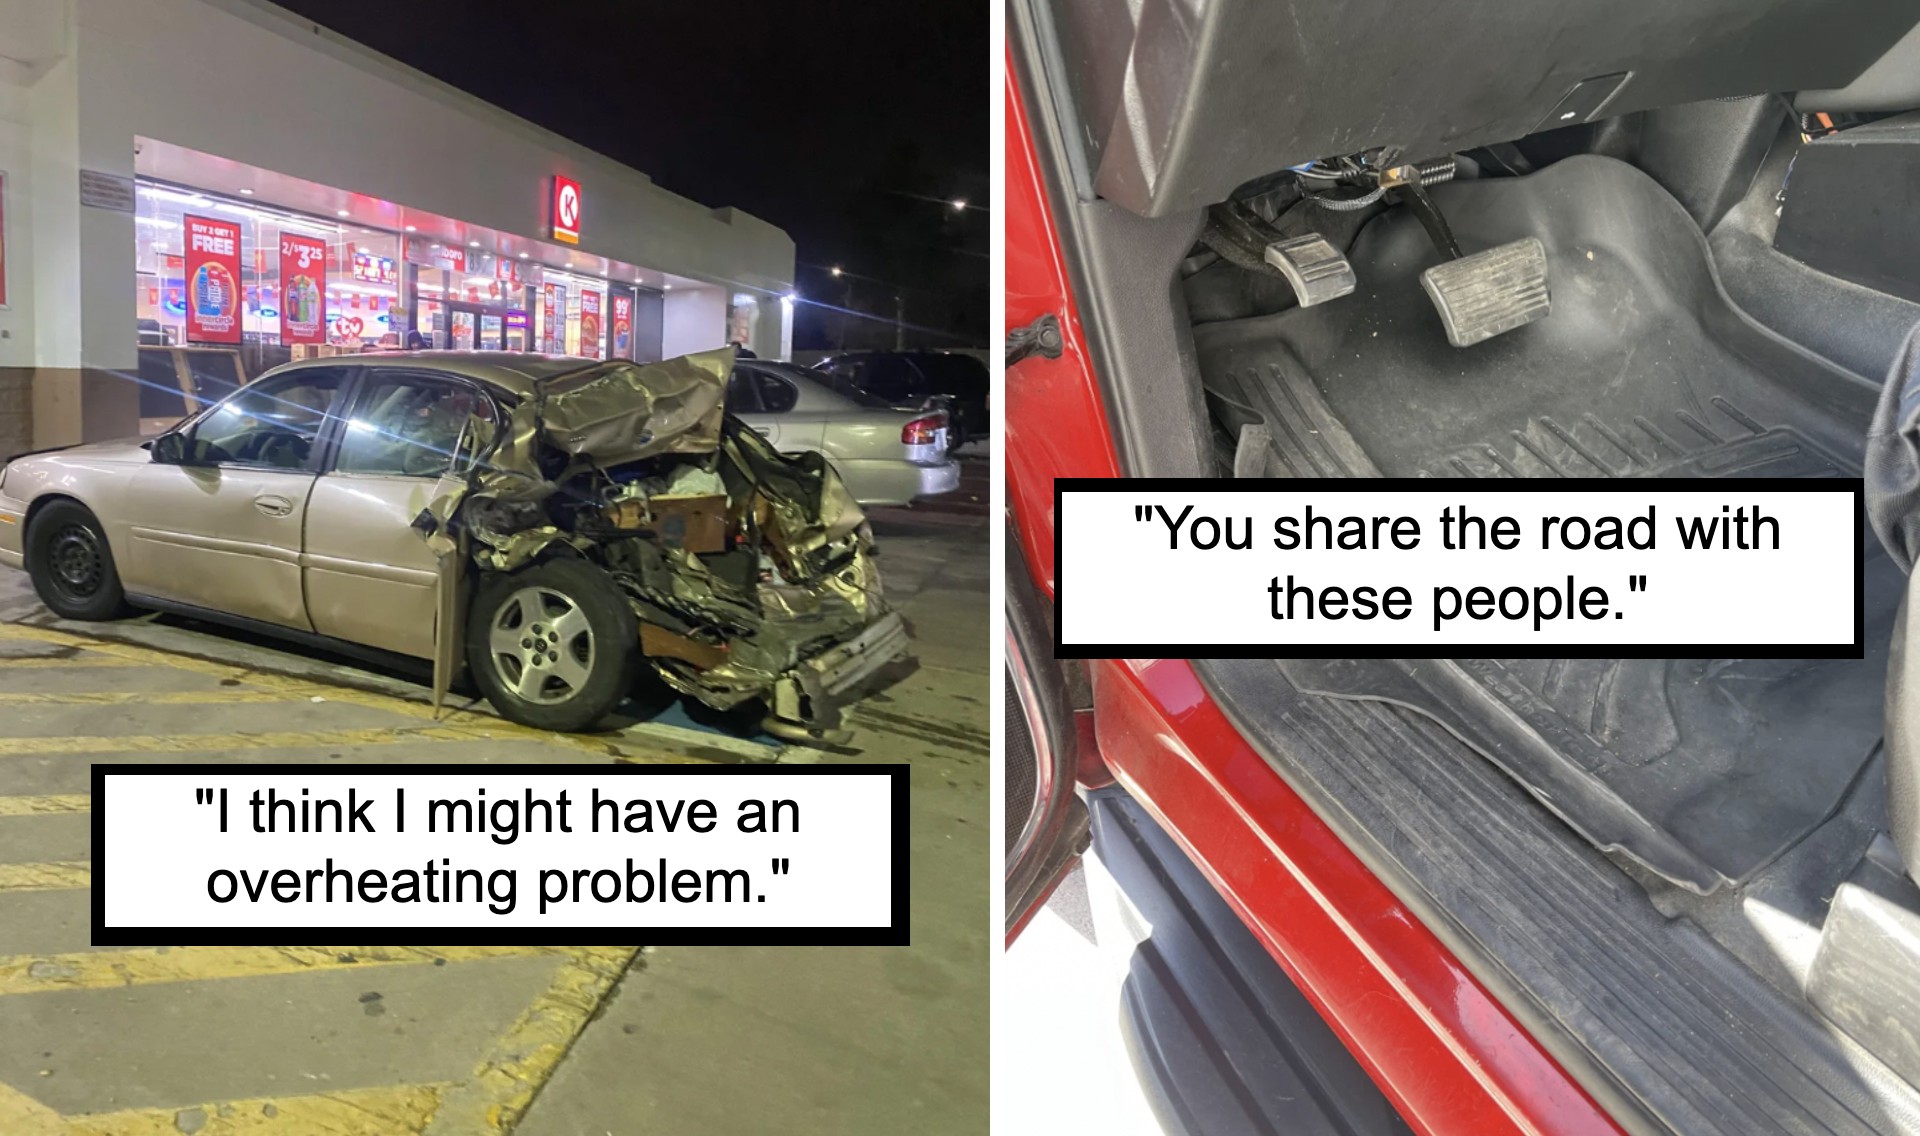 A two-panel image: the left panel shows a severely damaged car parked outside a store at night, captioned "I think I might have an overheating problem." The right panel shows a car interior with unusually worn-out pedals, captioned "You share the road with these people.